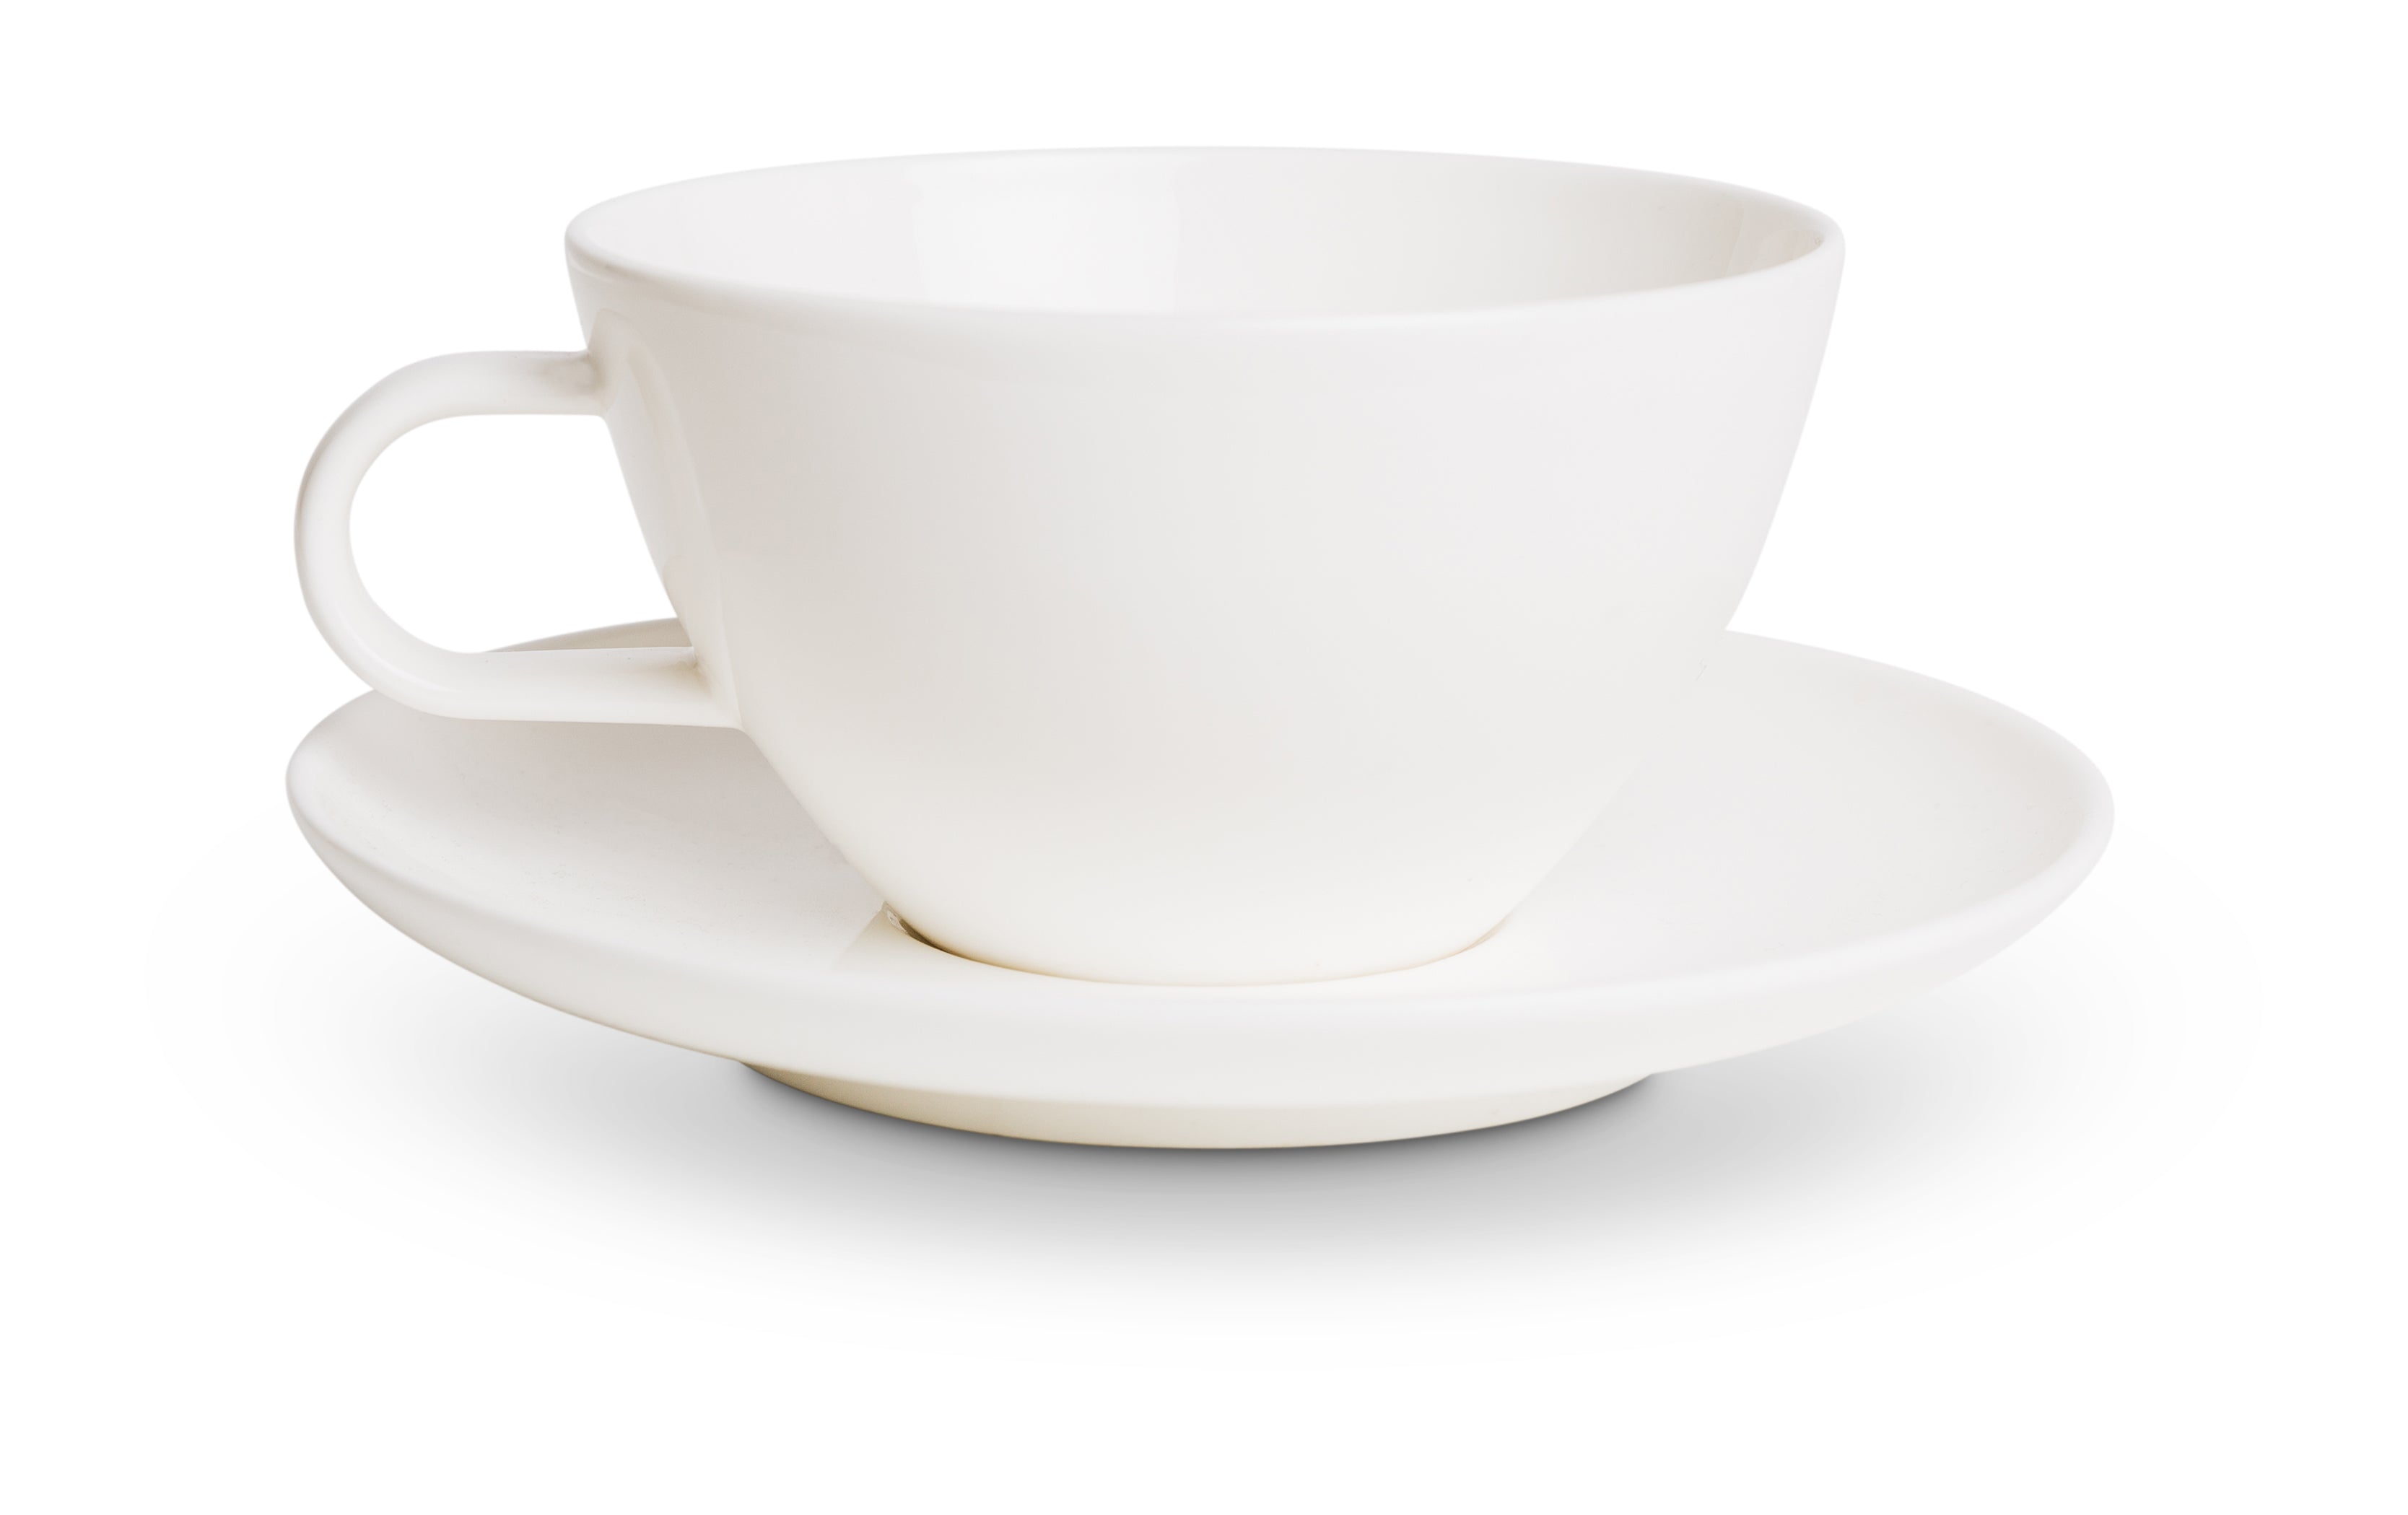 https://cdn.shopify.com/s/files/1/0289/8867/0038/products/ssph.zone-1672148164-2021_Tea_Cup_and_saucer.jpg?v=1672148254&width=3336